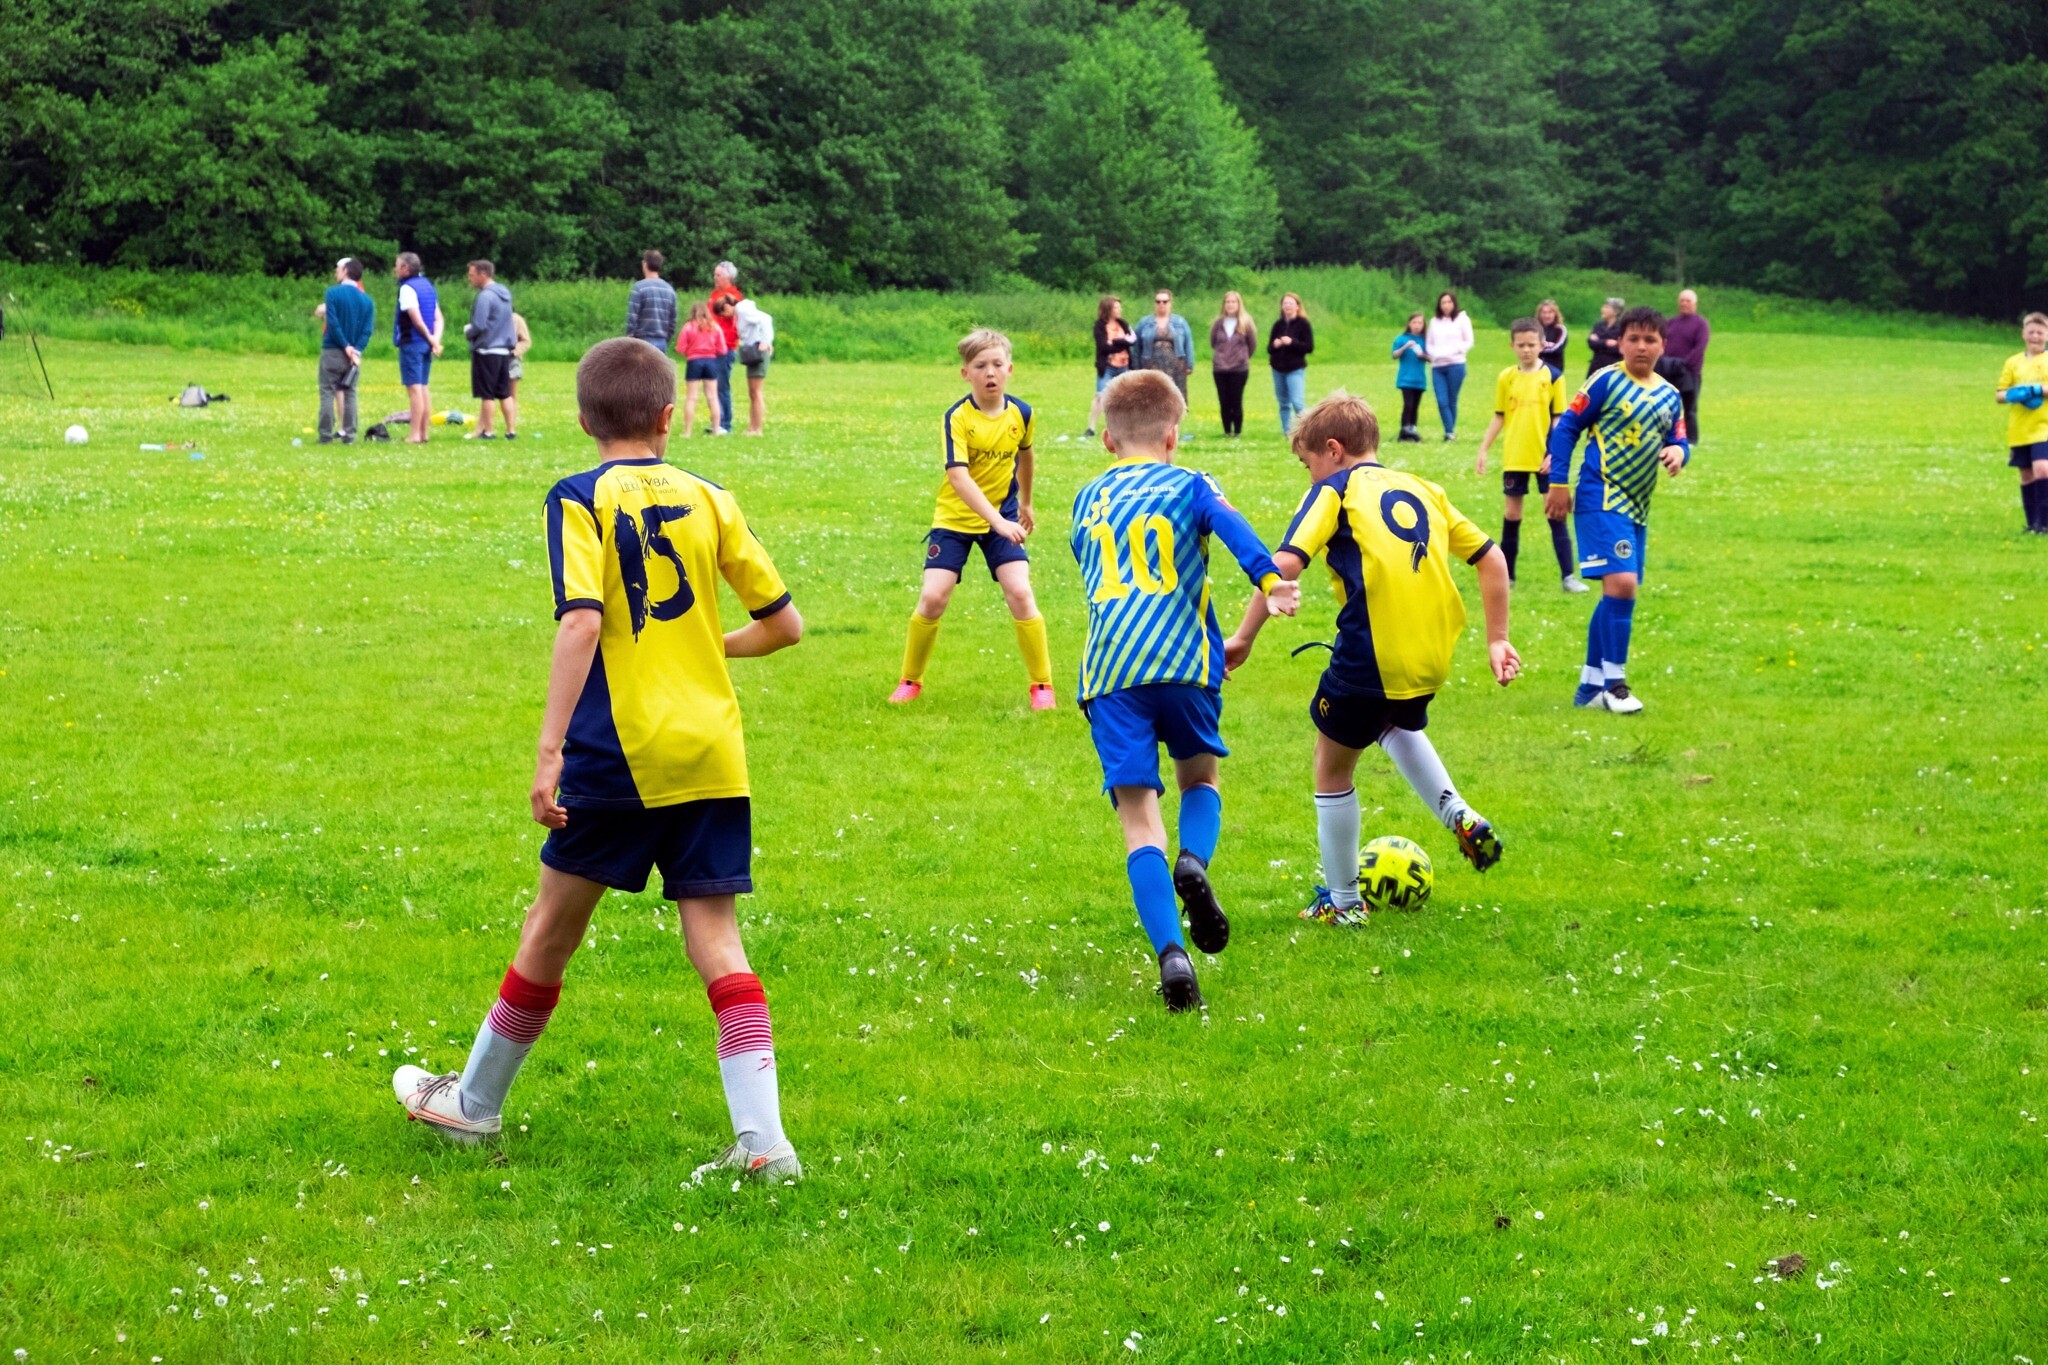 Youth football club begins investigation after boy refuses to play against Jewish team